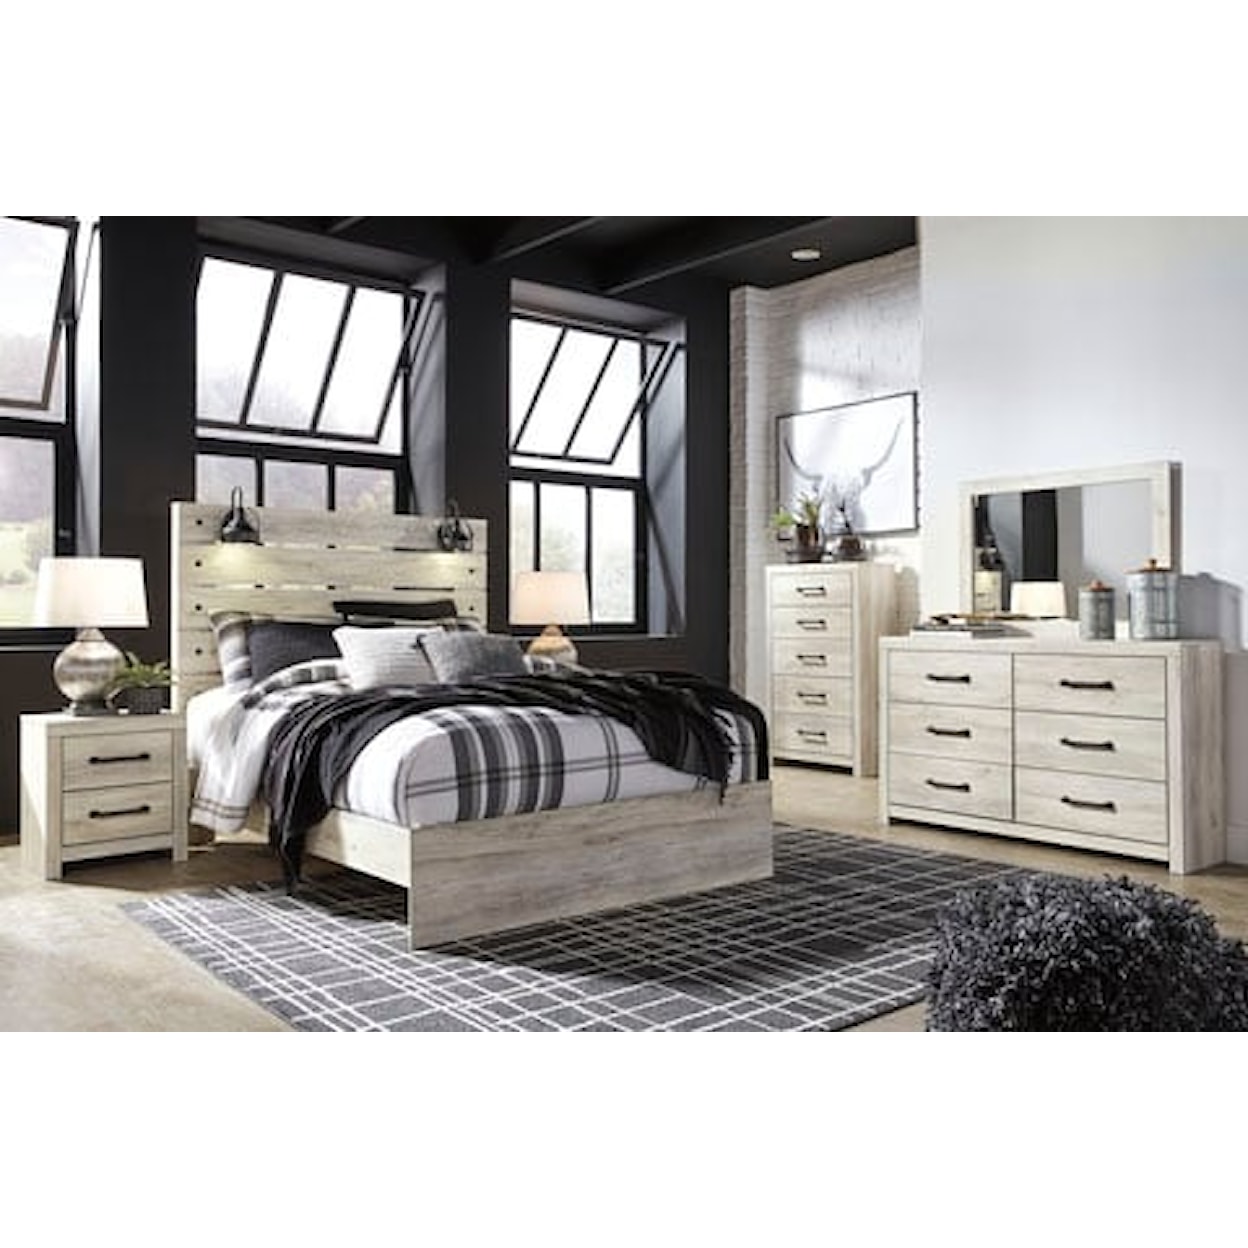 Signature Design by Ashley Cambeck Queen Bed, Dresser, Mirror, Chest